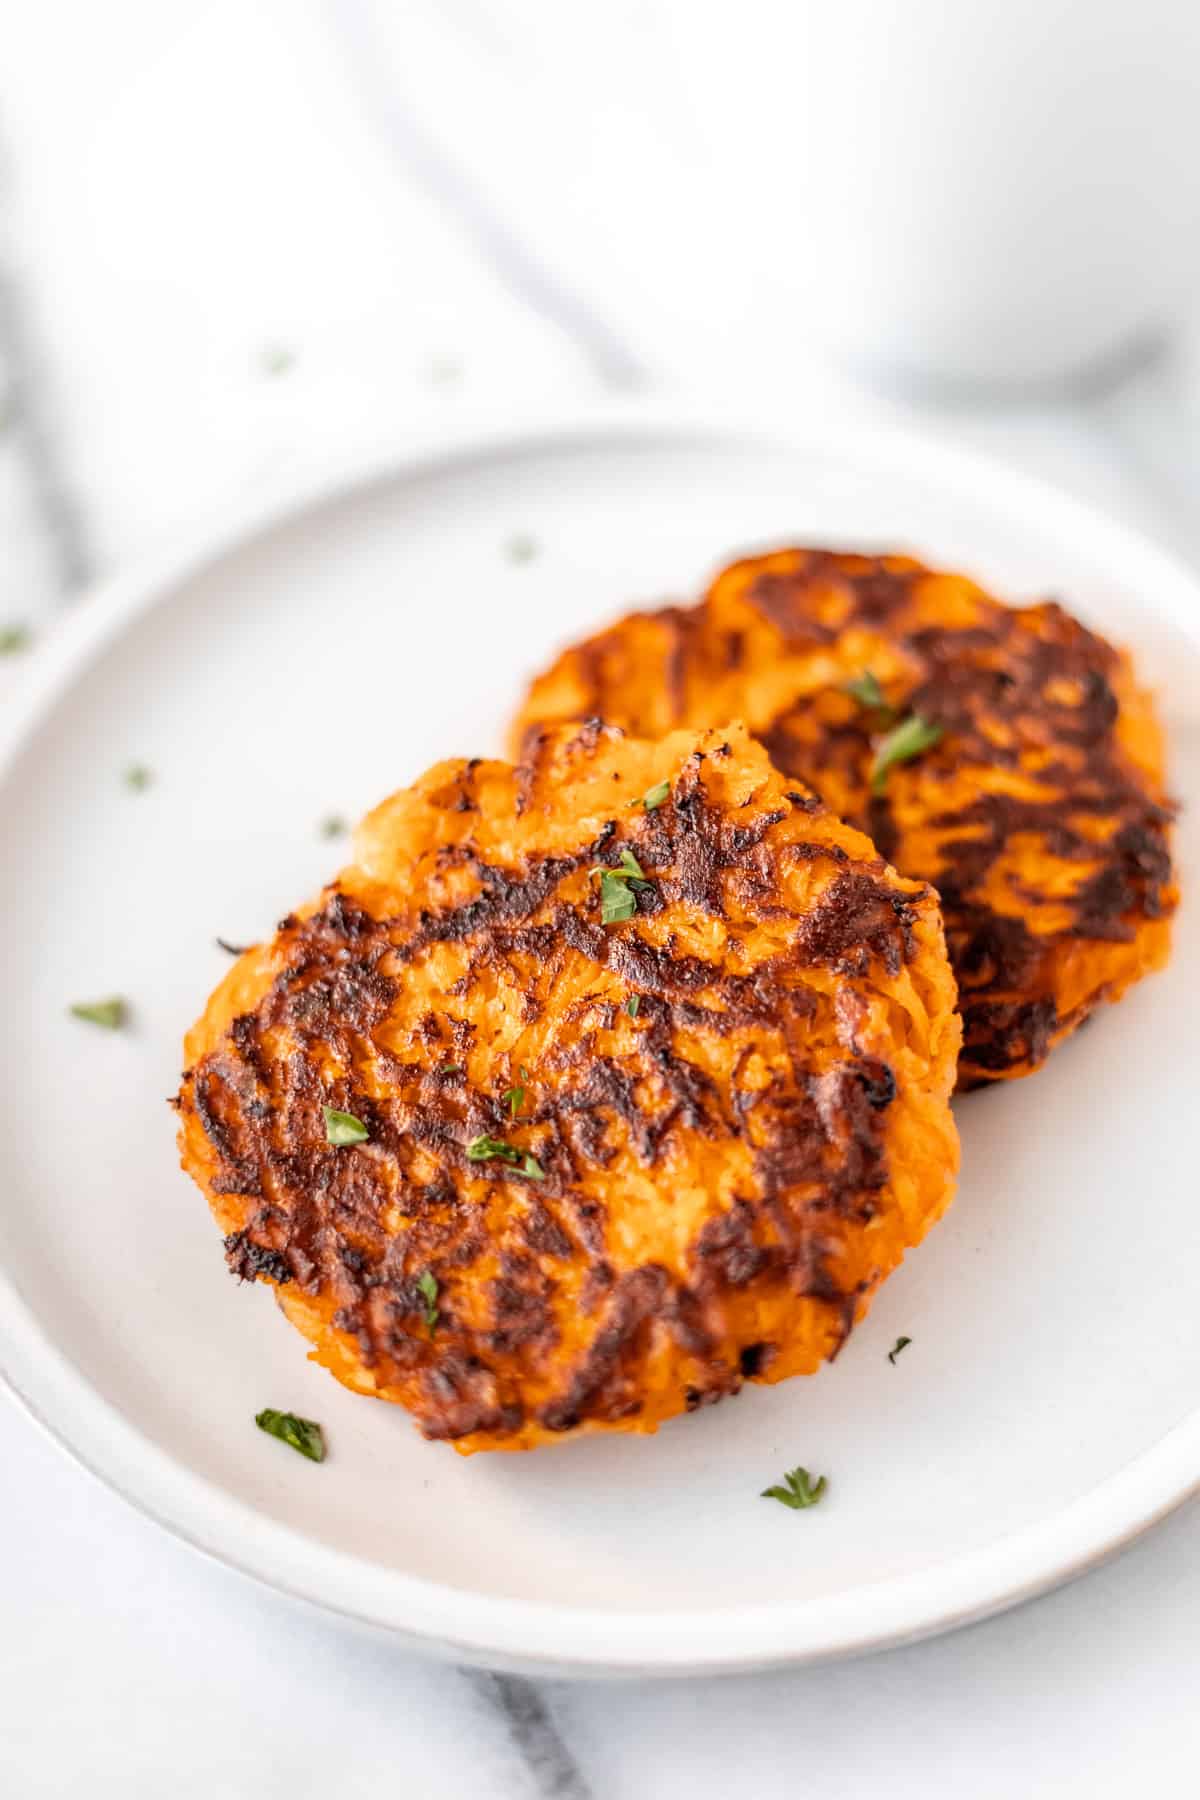 Two sweet potato hash browns layered on a white plate with a white mug in the background.